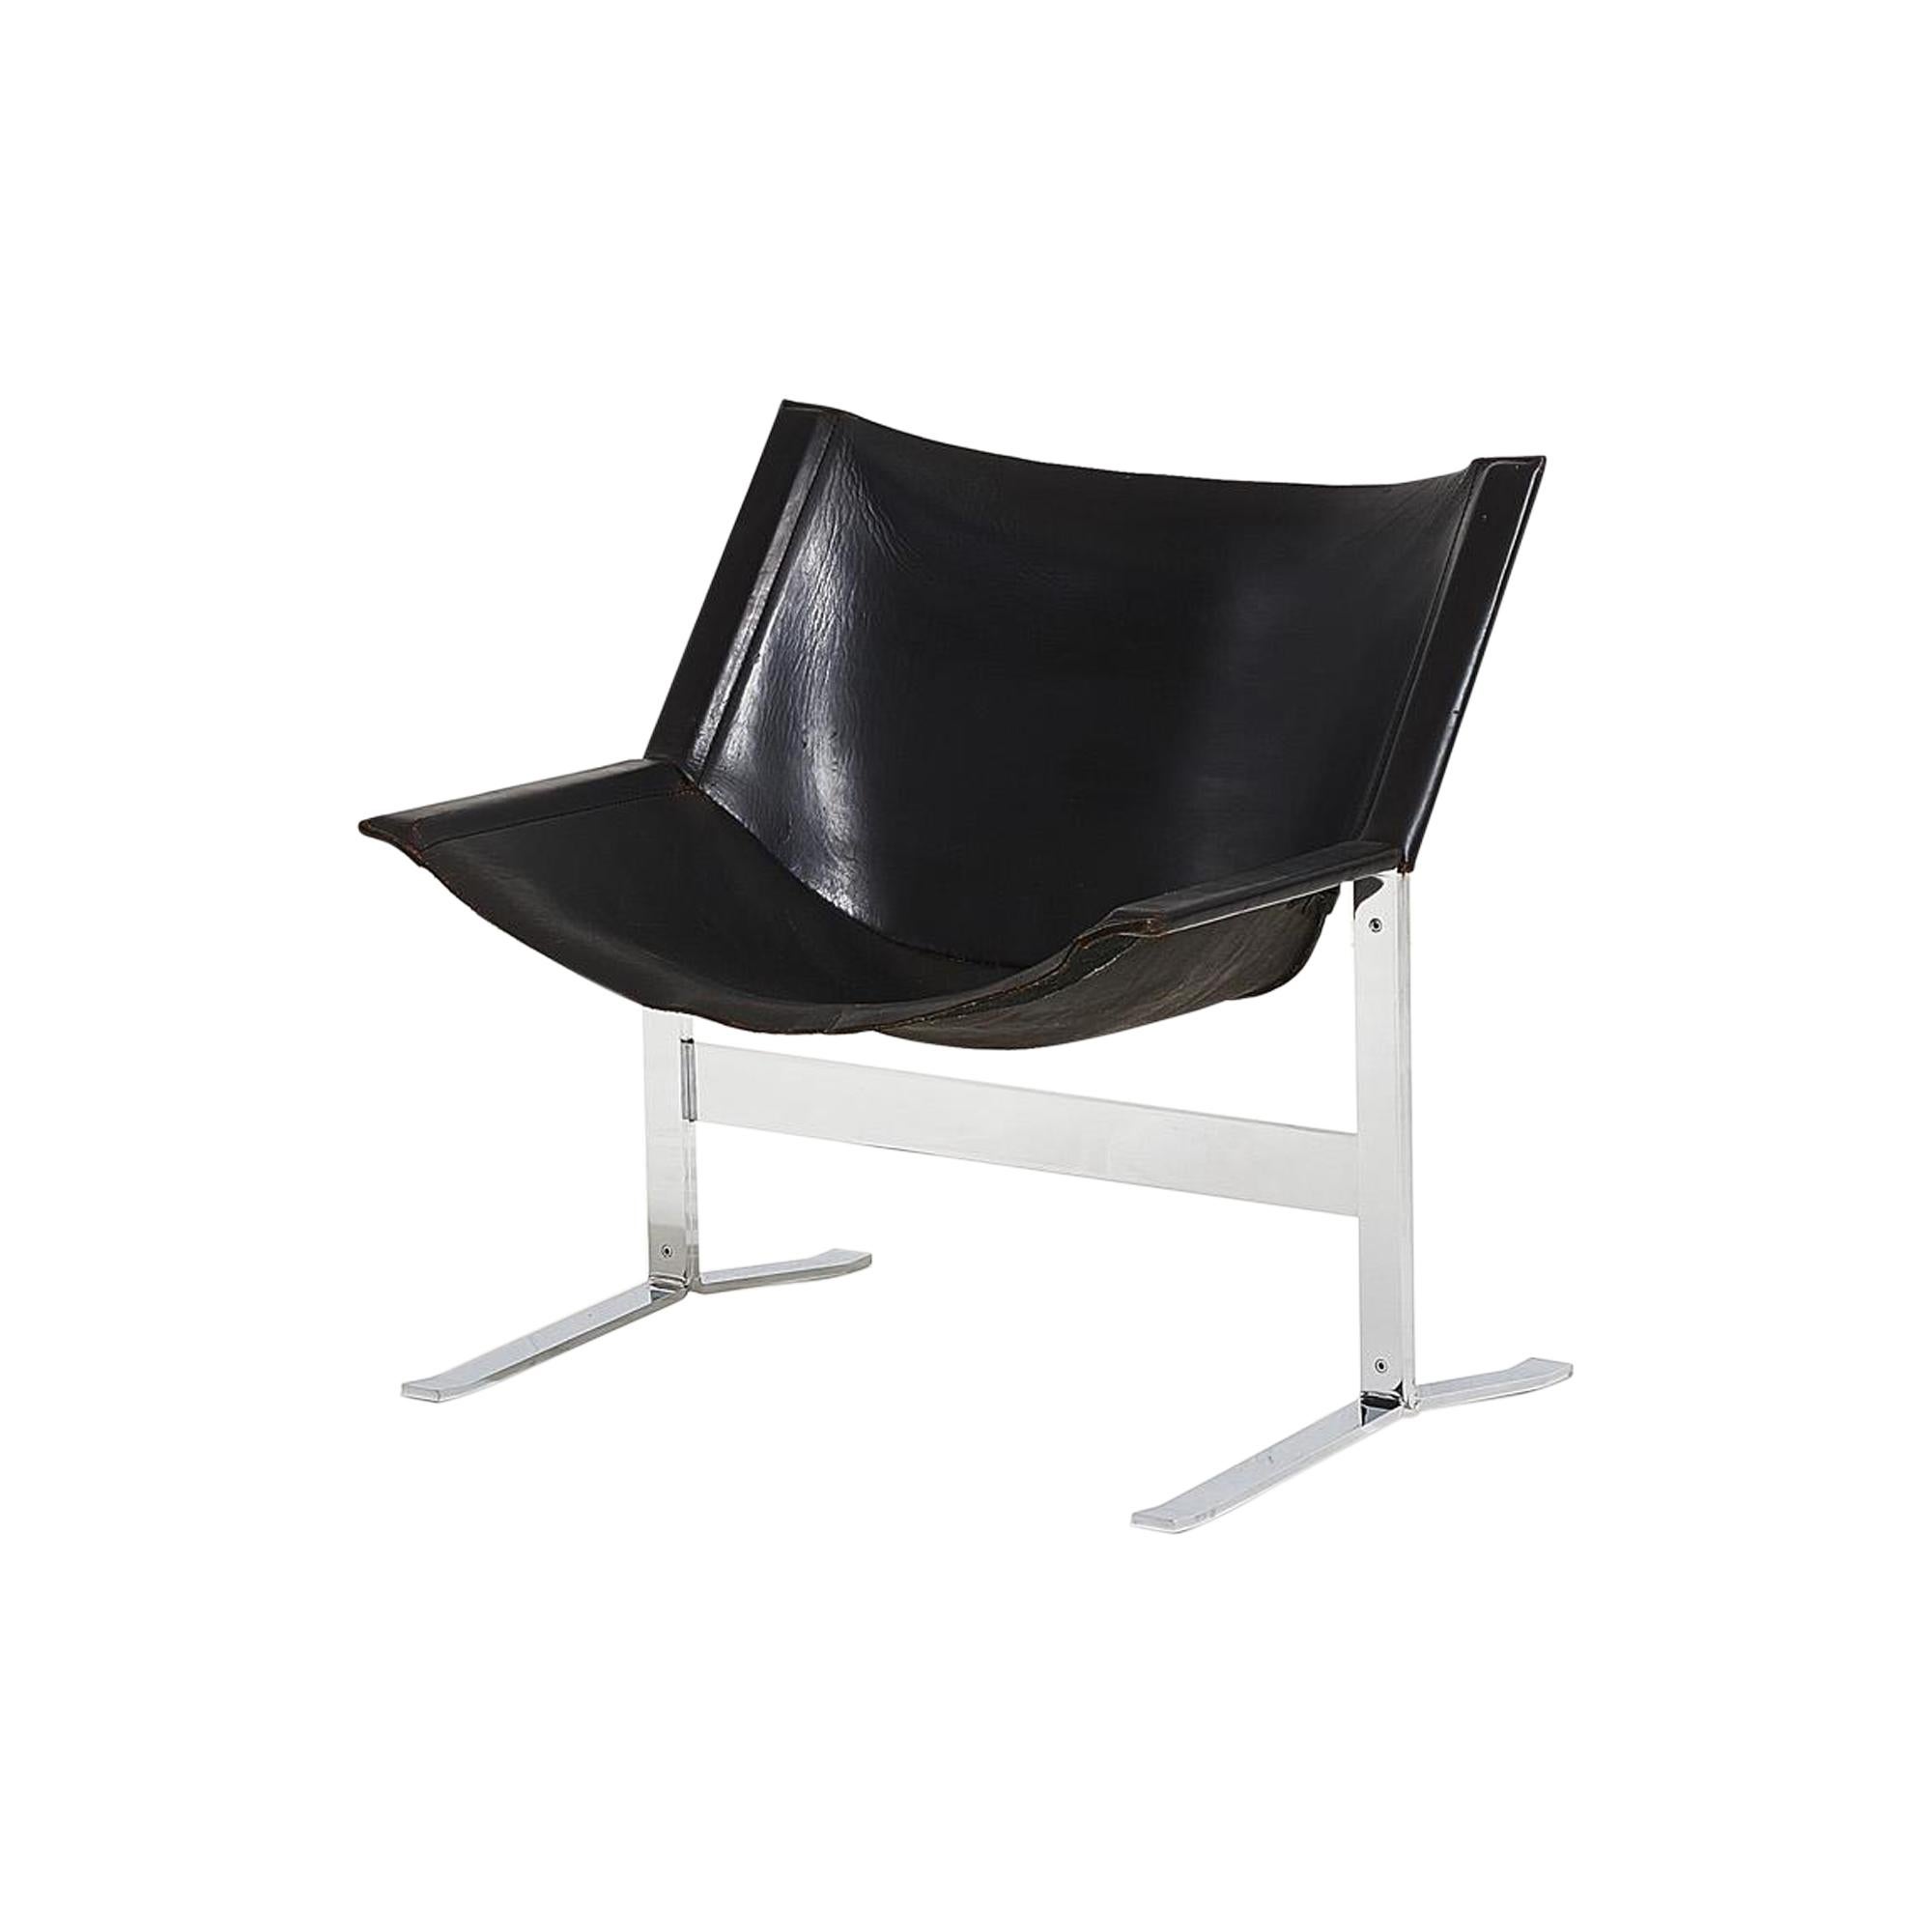 Sling Chair Model 248 by Clement Meadmore, circa 1970